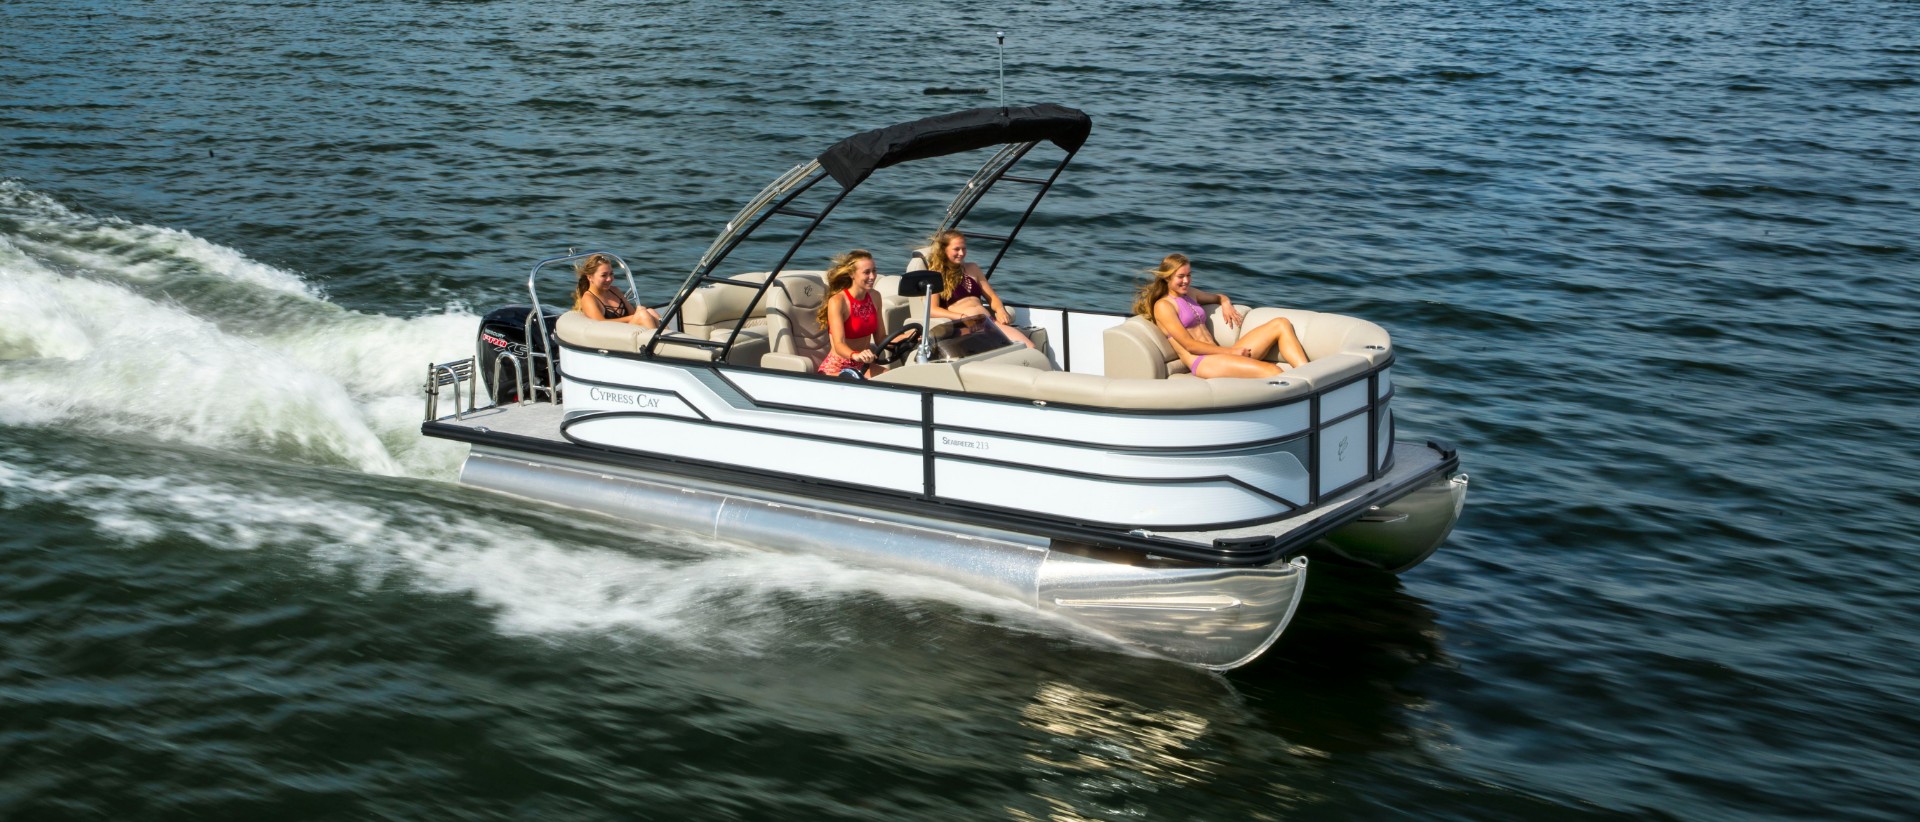 Lewis Boats and Powersports - Offering New & Used Barletta,Crestliner,Cypress Cay,Sylvan ...